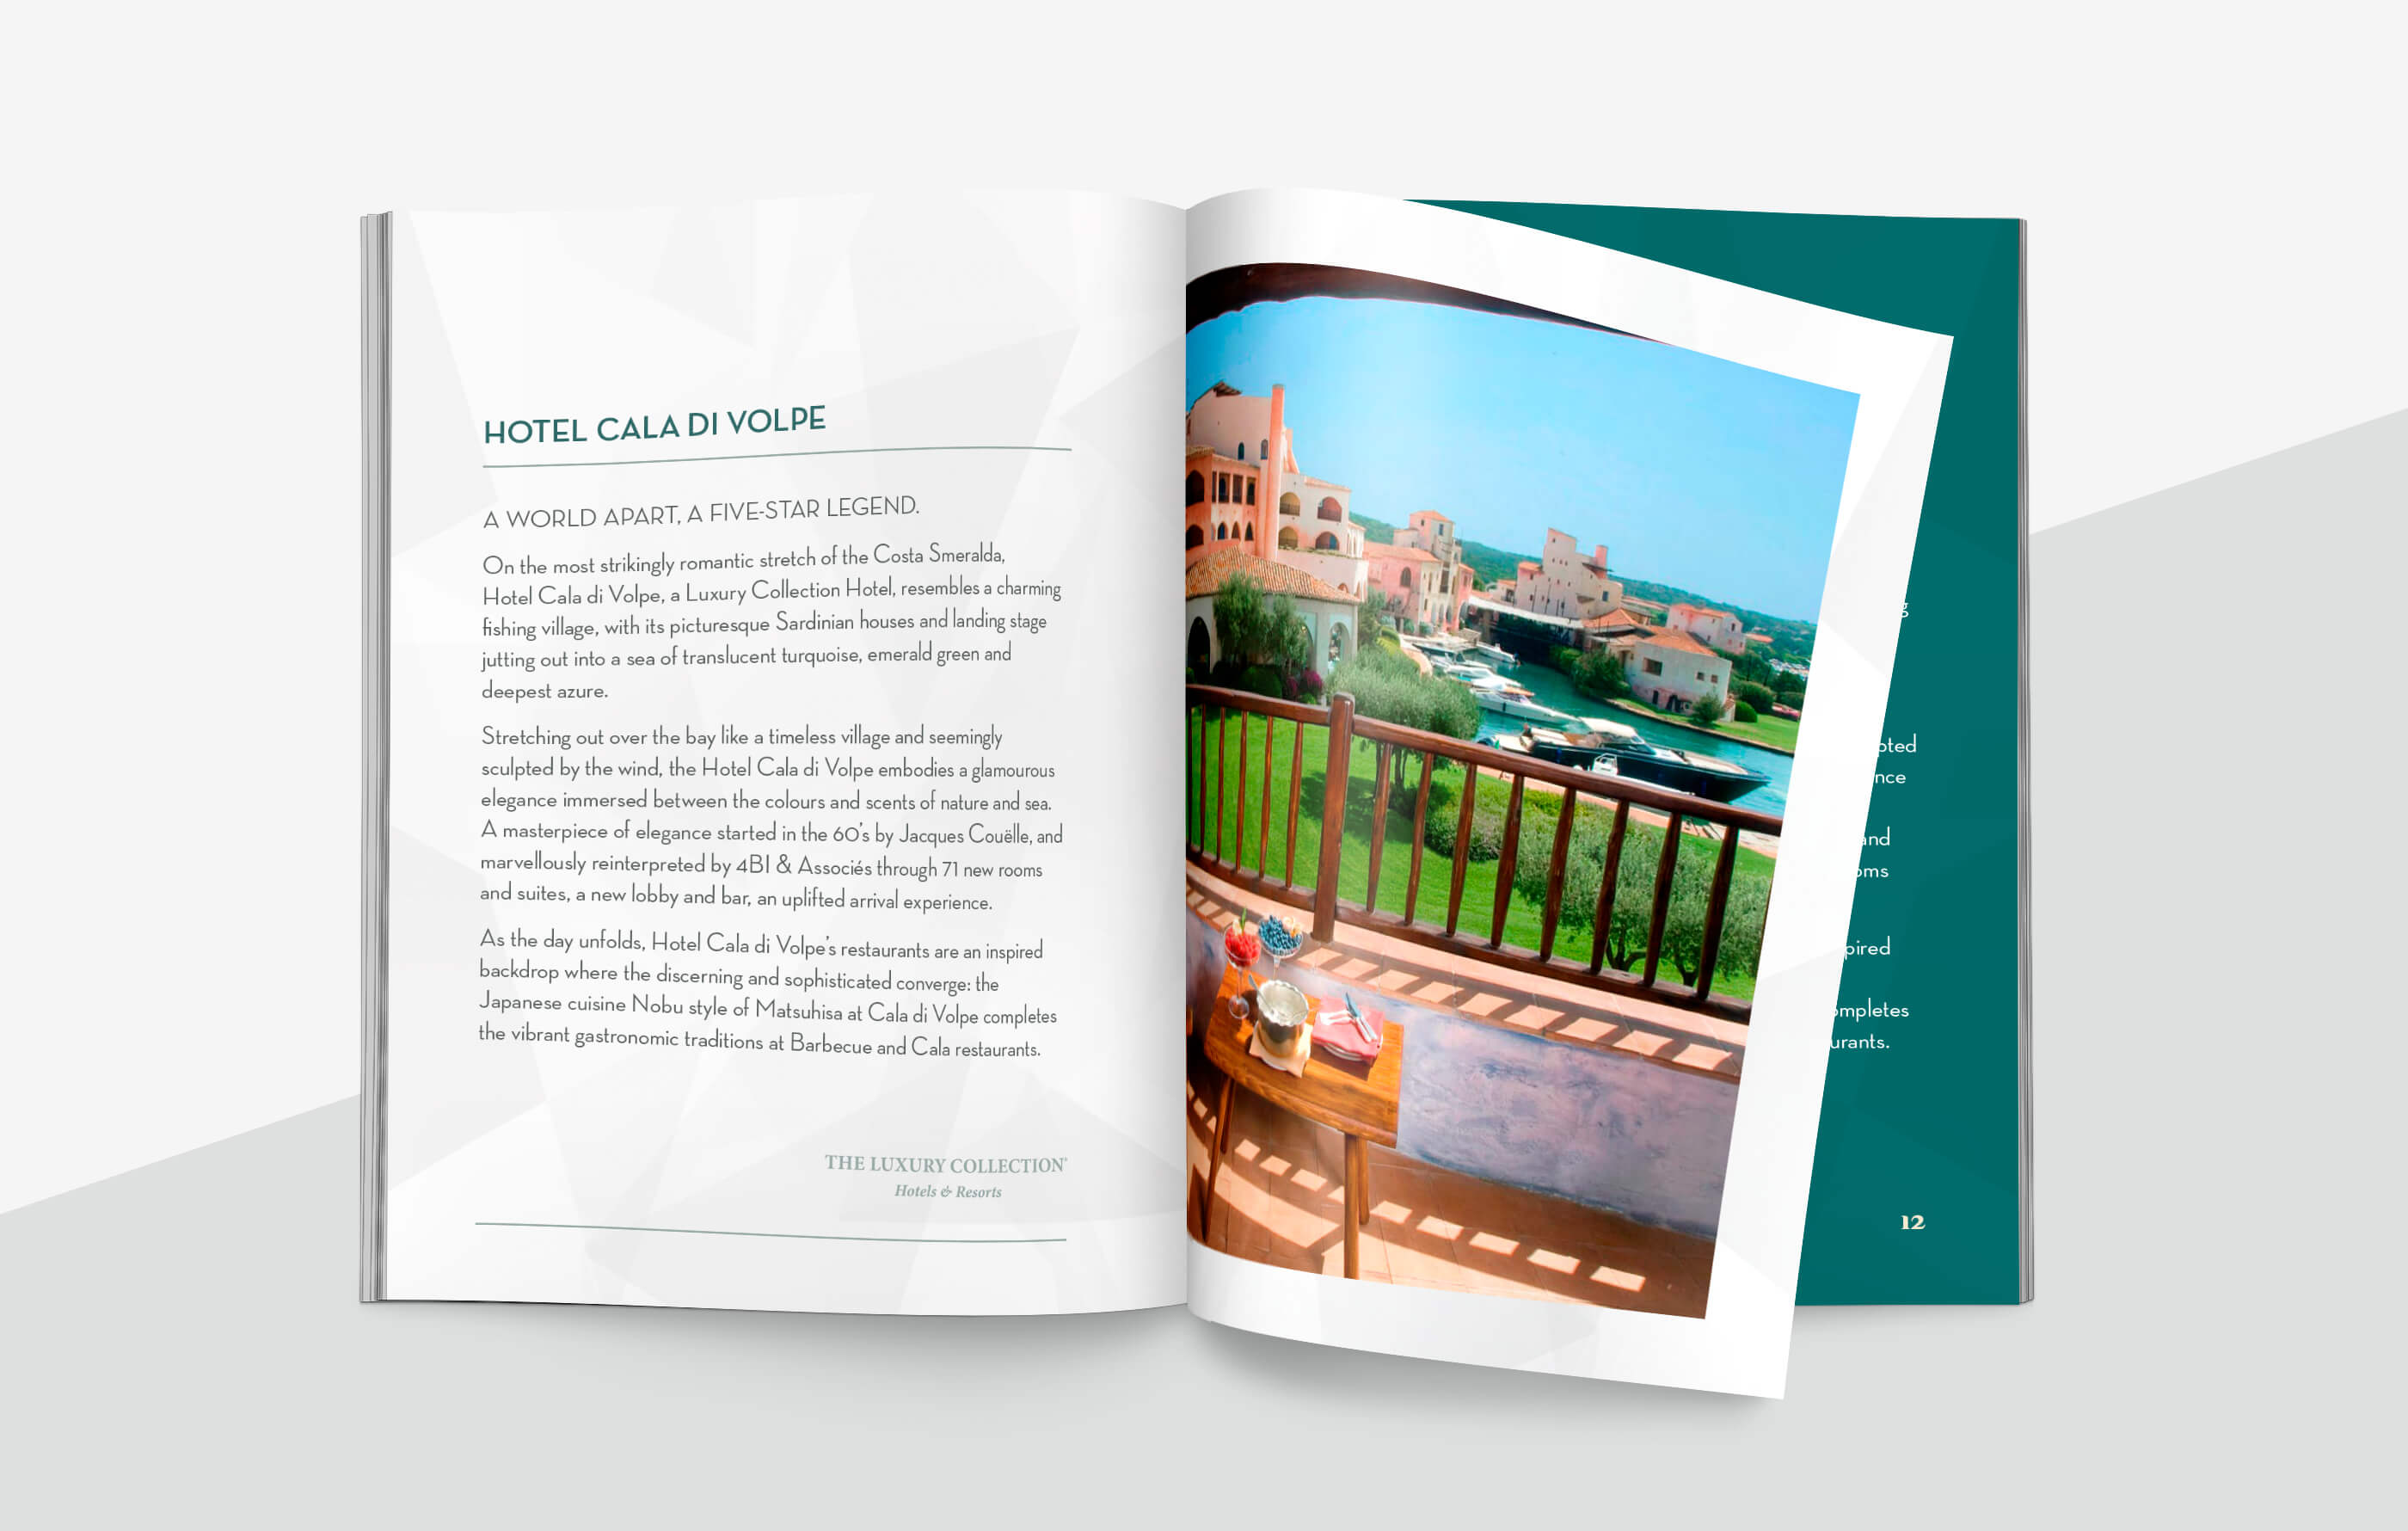 Double page spread of a winner's welcome booklet, featuring information about the Cala Di Volpe Hotel on the left page and a photo of it on the right